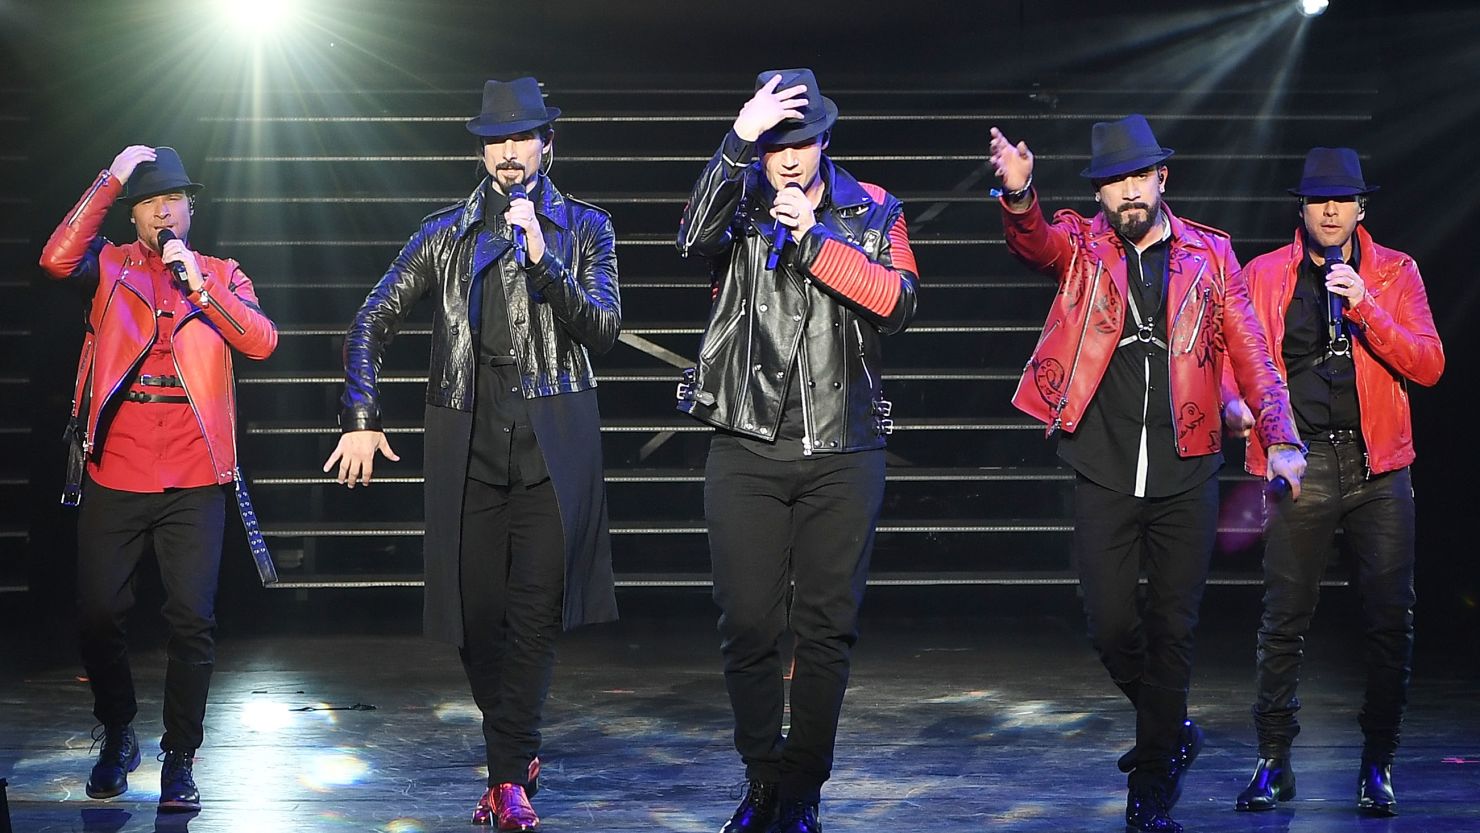 LAS VEGAS, NV - MARCH 01:  (L-R) Brian Littrell, Kevin Richardson, Nick Carter, AJ McLean and Howie Dorough of the Backstreet Boys perform during the launch of the group's residency "Larger Than Life" at The Axis at Planet Hollywood Resort & Casino on March 1, 2017 in Las Vegas, Nevada.